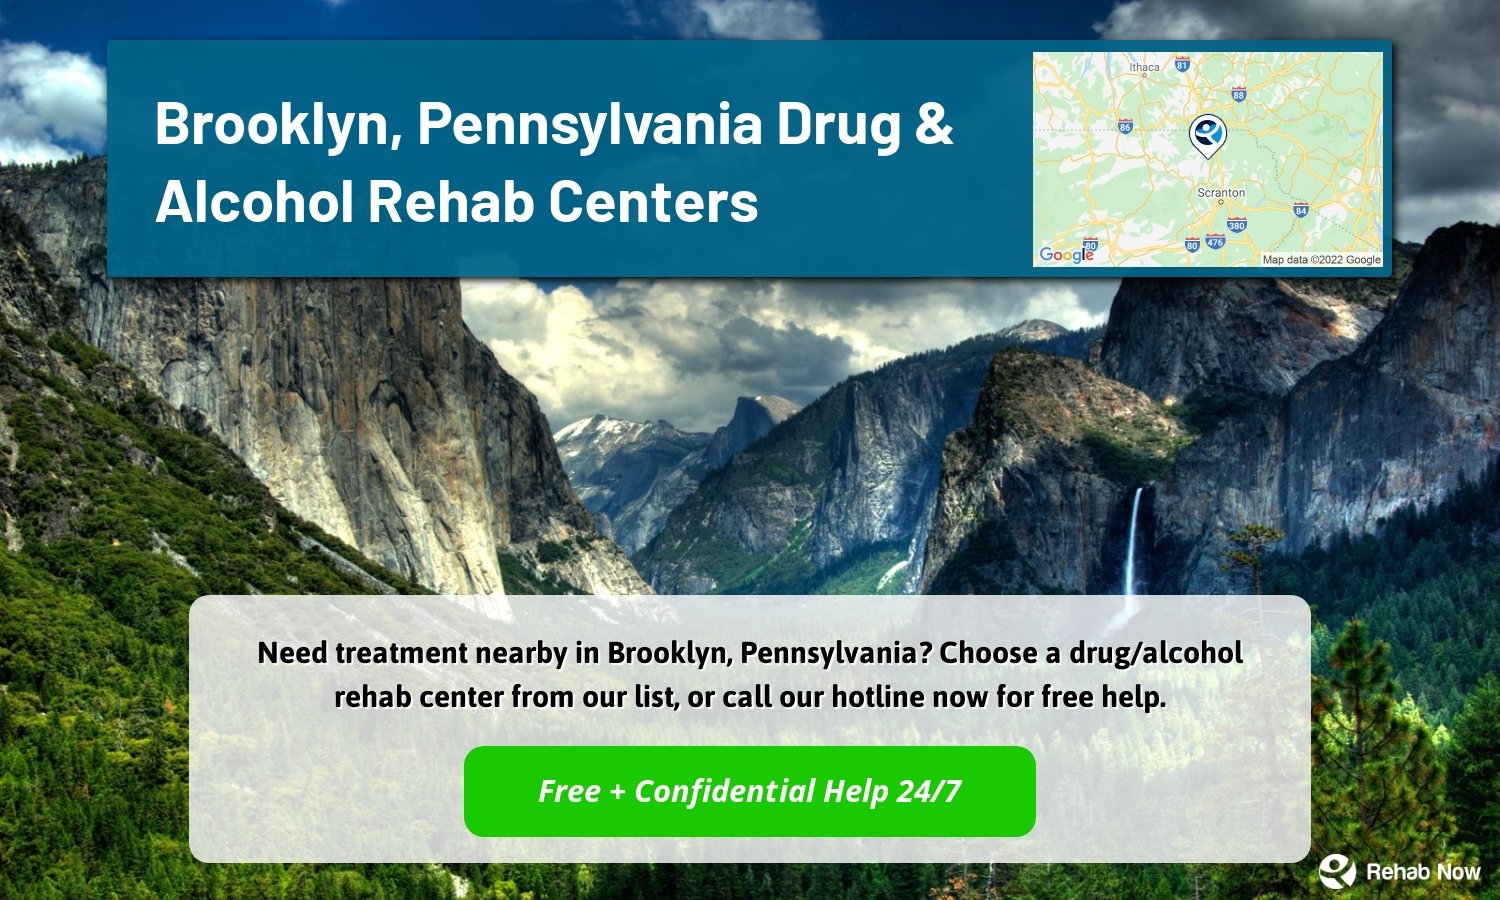 Need treatment nearby in Brooklyn, Pennsylvania? Choose a drug/alcohol rehab center from our list, or call our hotline now for free help.